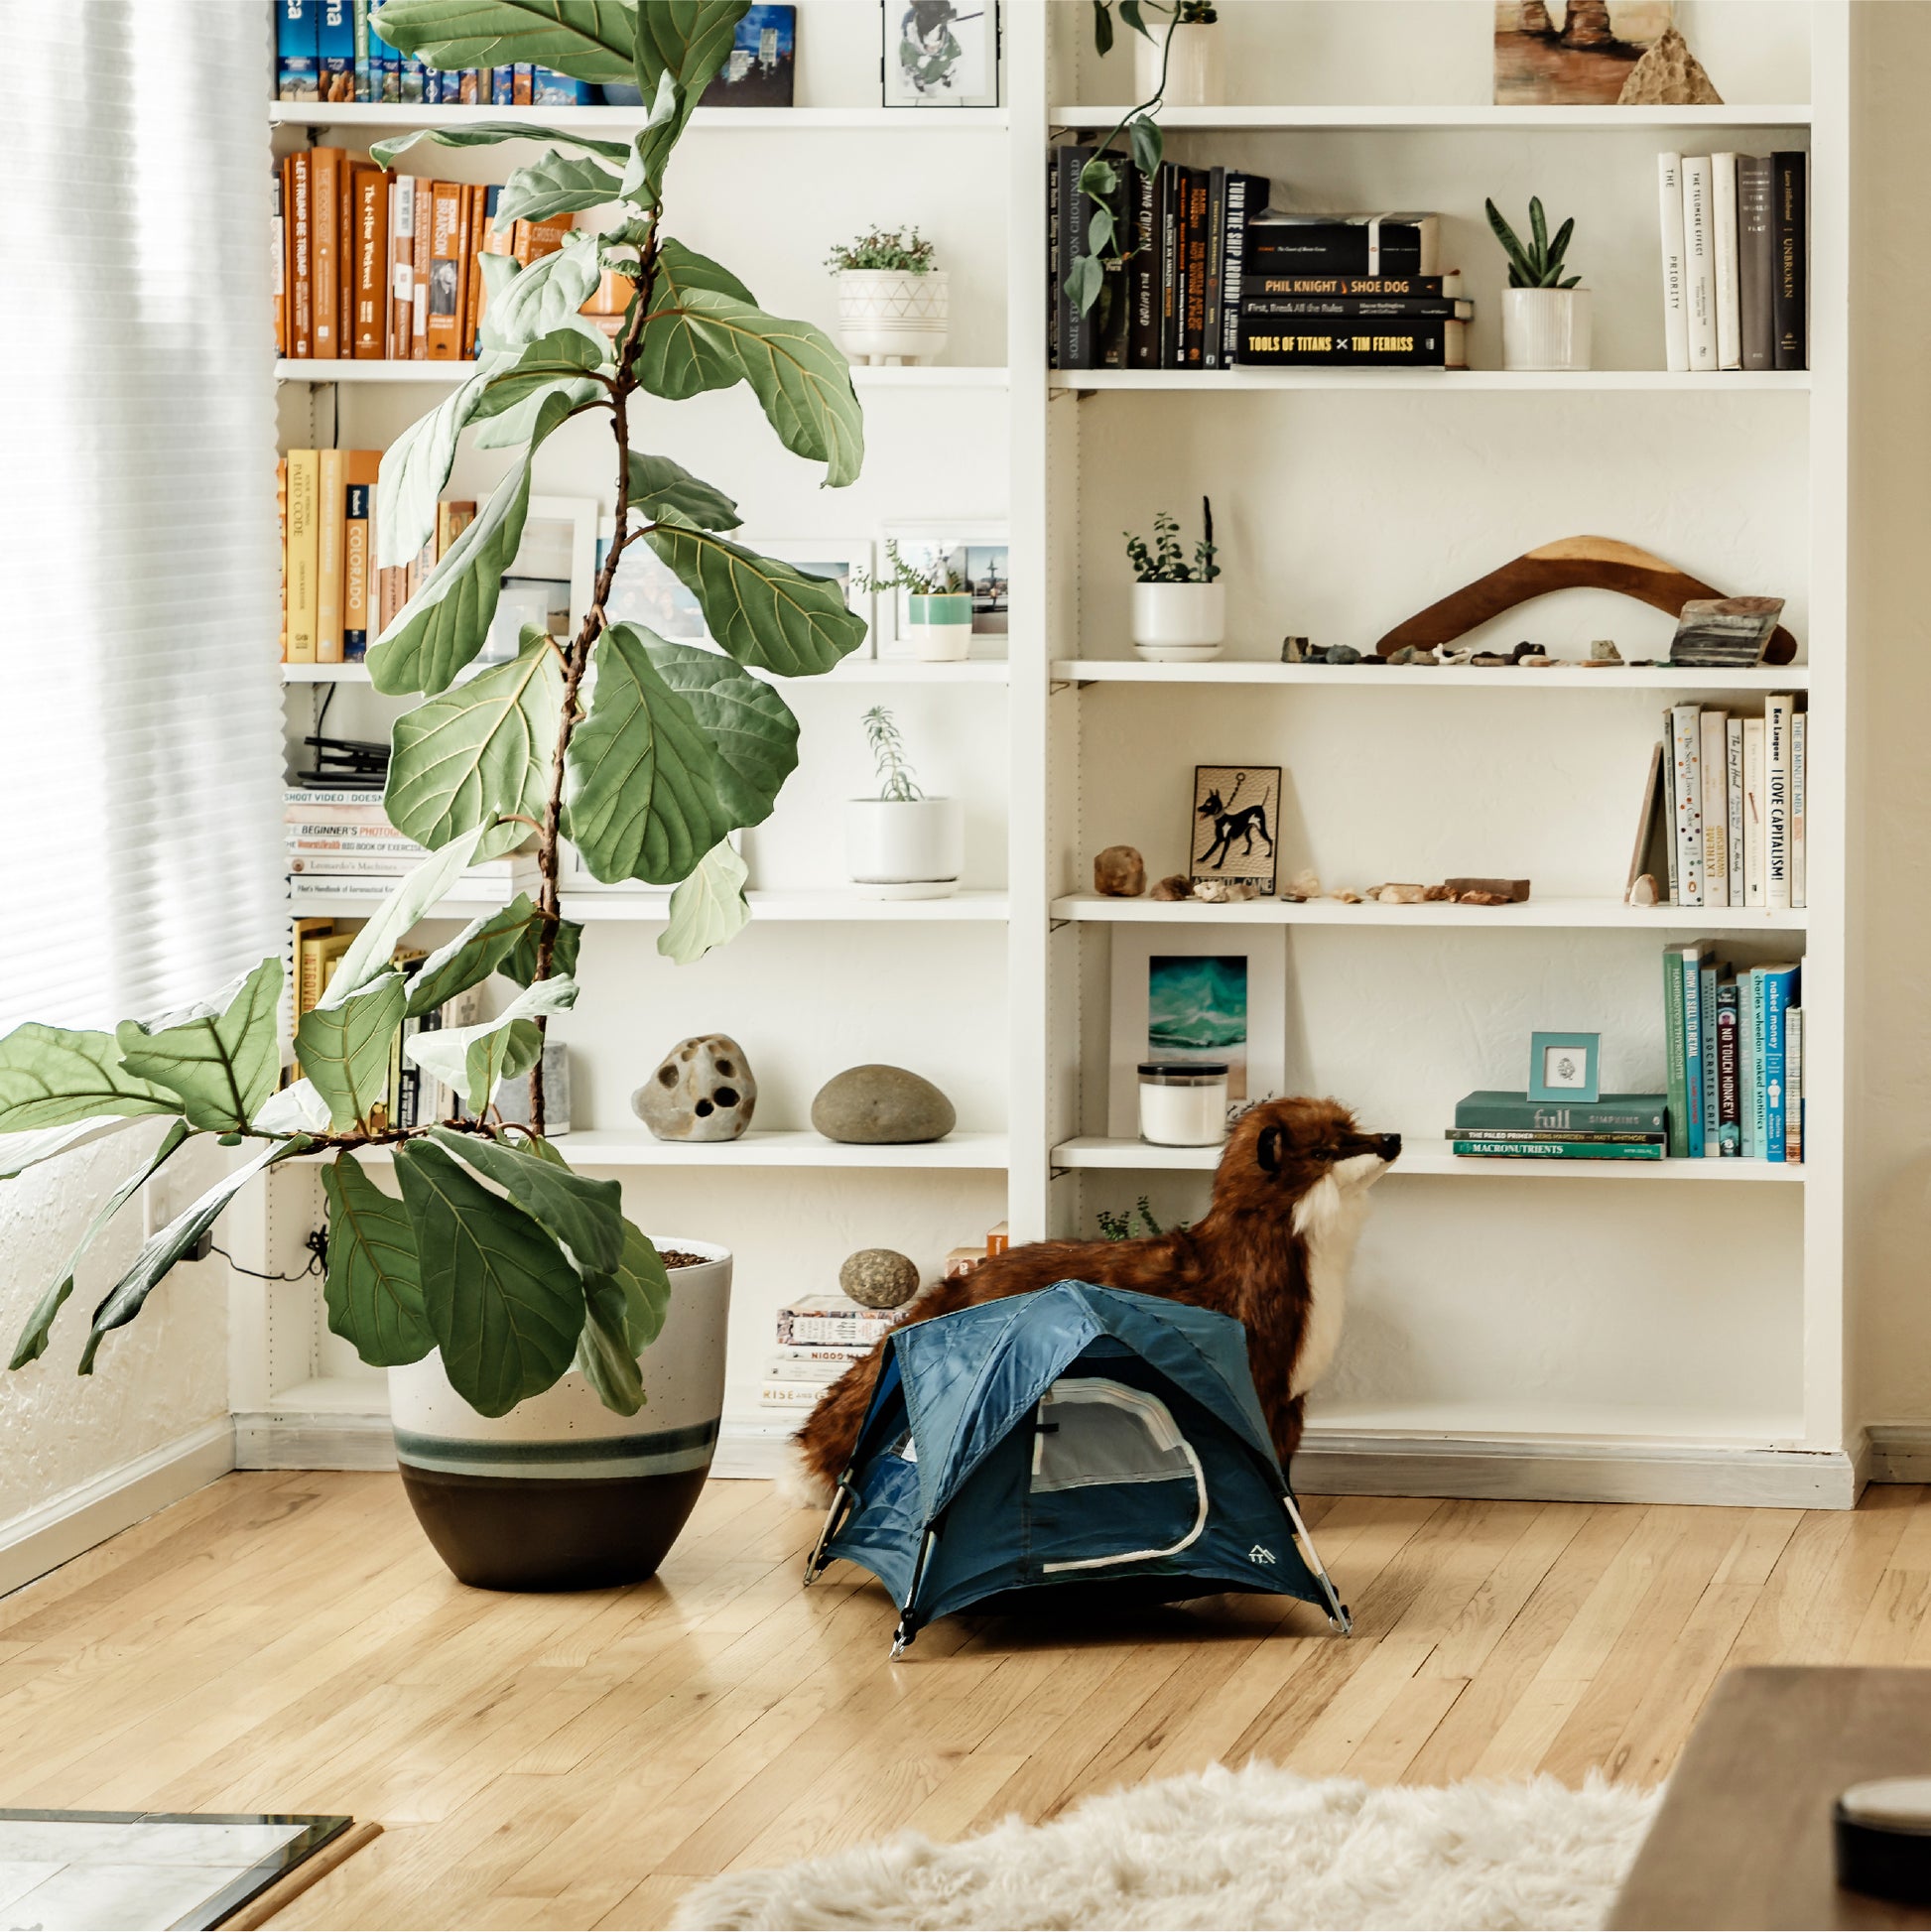 blue tiny tent shown in front of bookshelf with a houseplant.